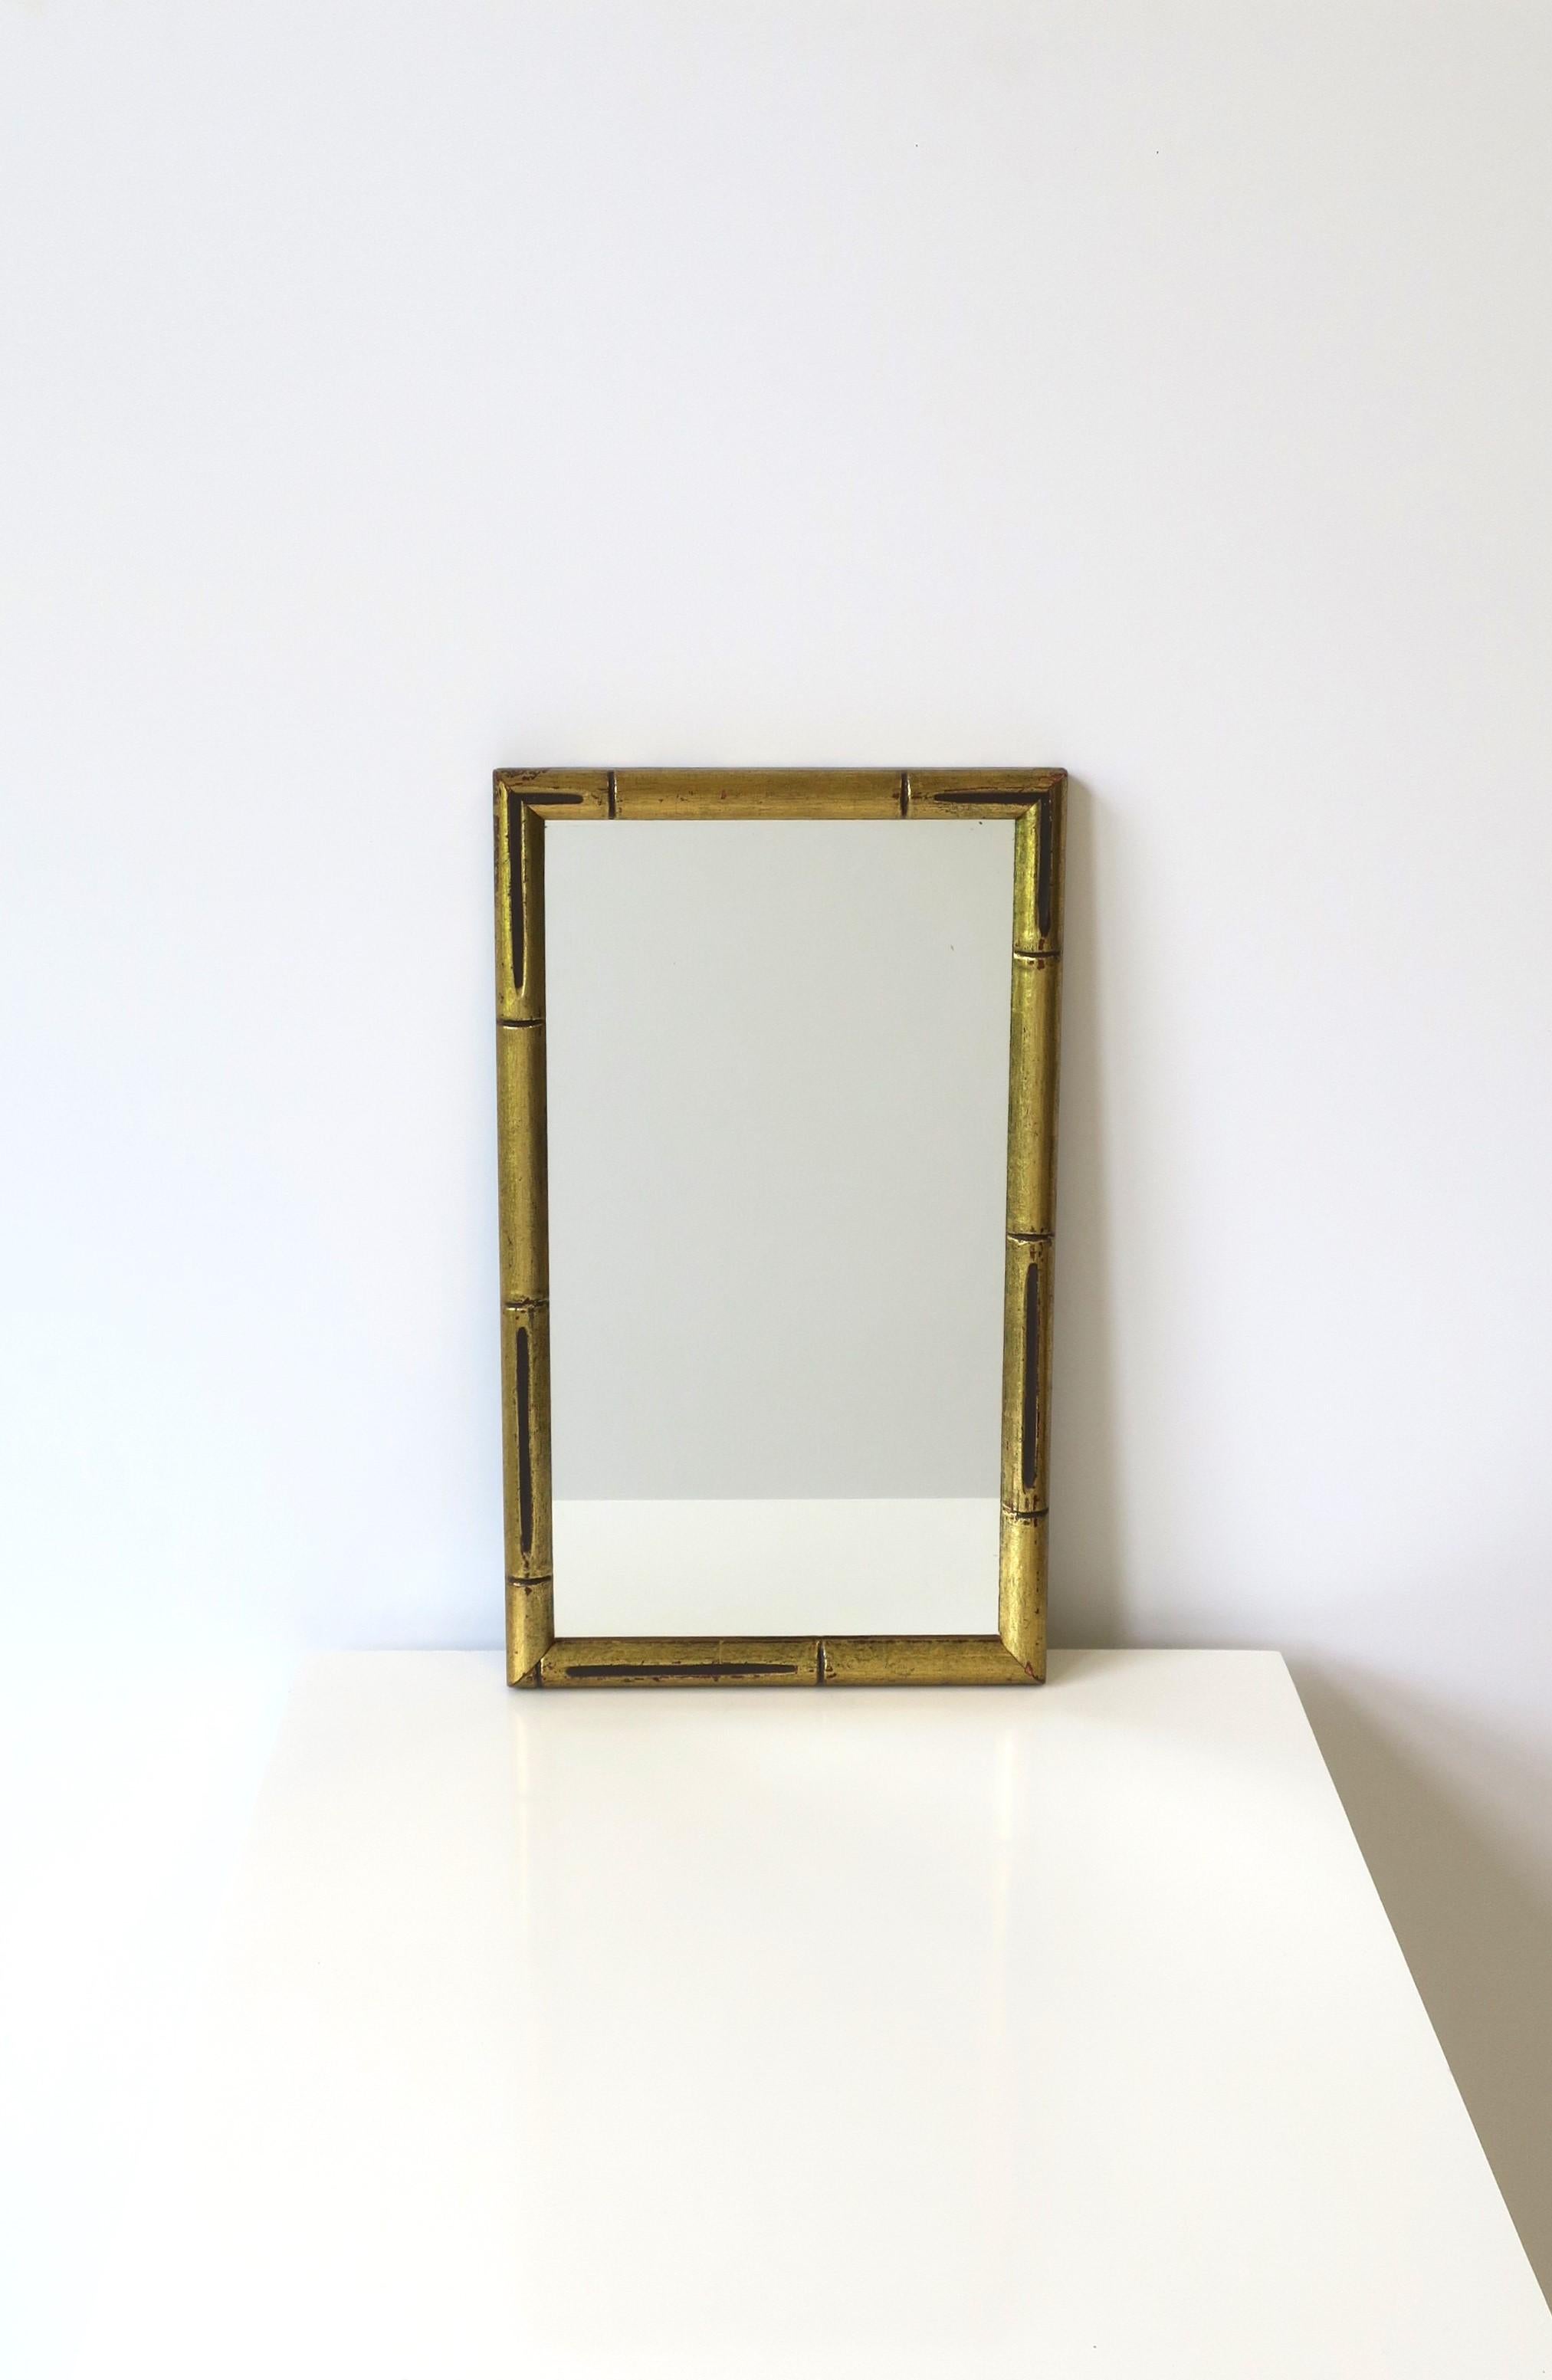 A gold giltwood bamboo style framed wall or vanity mirror in the Chinoiserie style, circa late-20th century, New York. Mirror is rectangular with a gold giltwood frame and design details that give it a 'bamboo' look. A great mirror for any wall